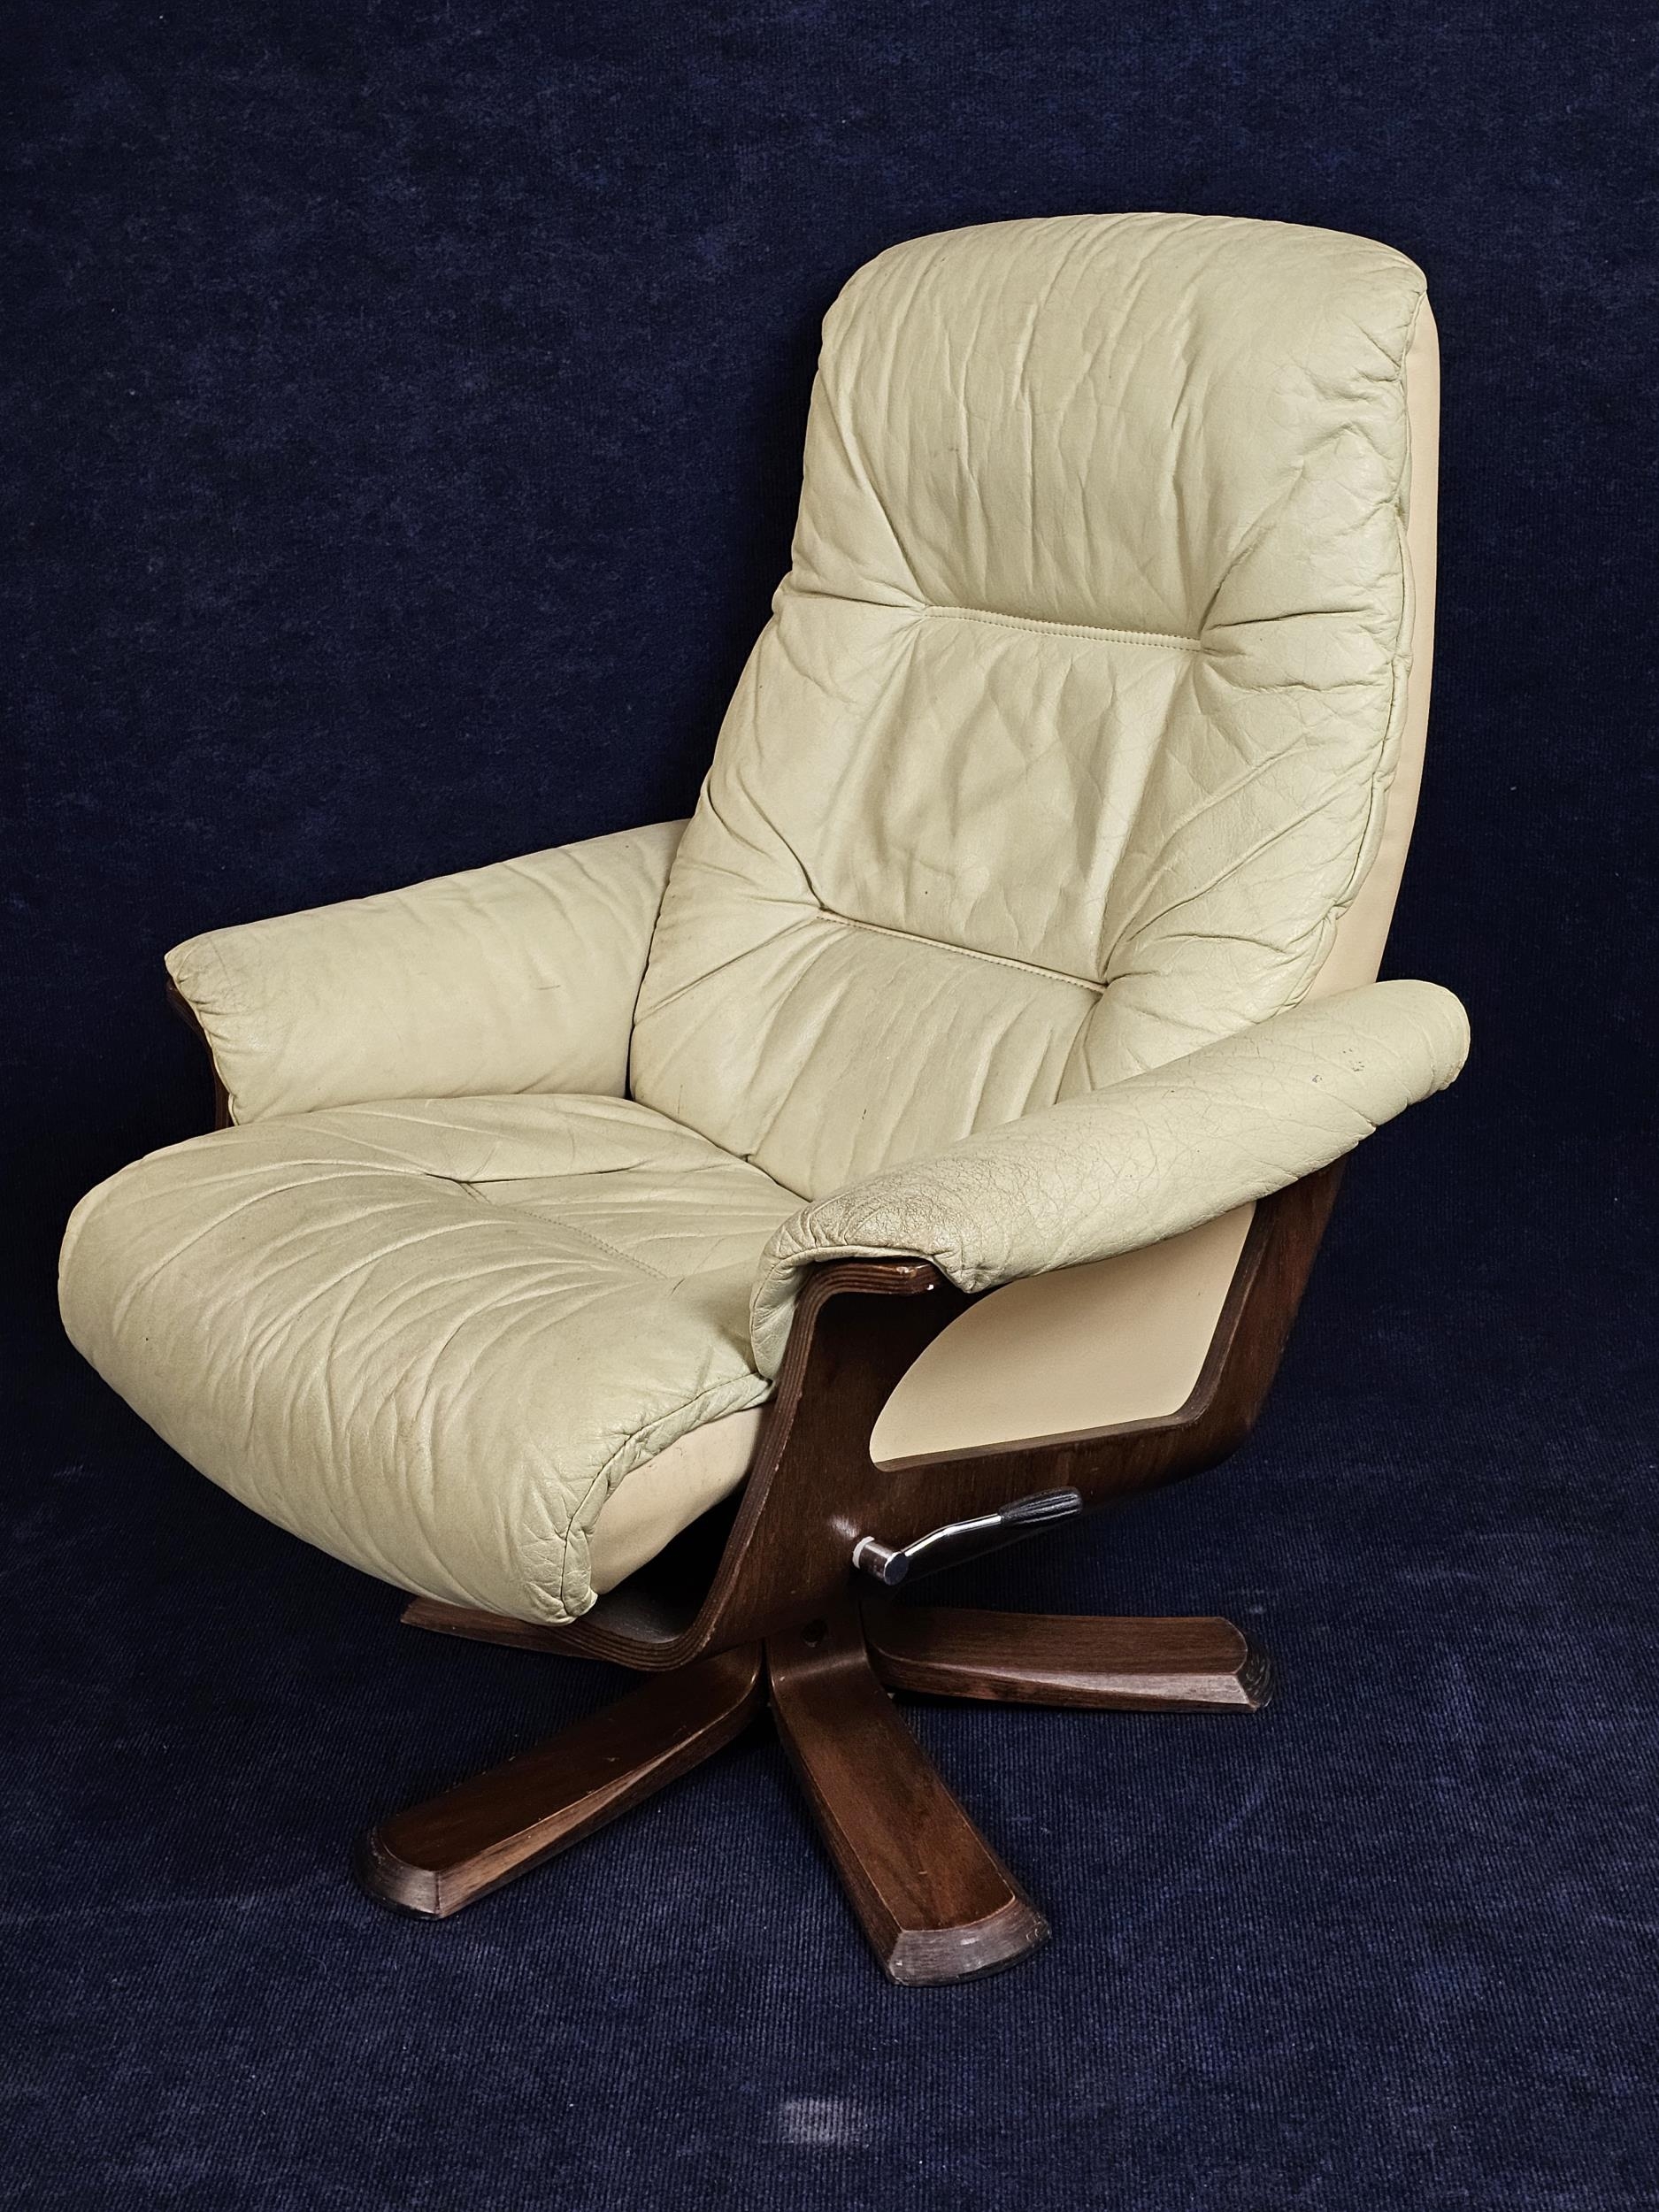 A contemporary Scandinavian leather upholstered armchair with reclining swivel action. - Image 2 of 3